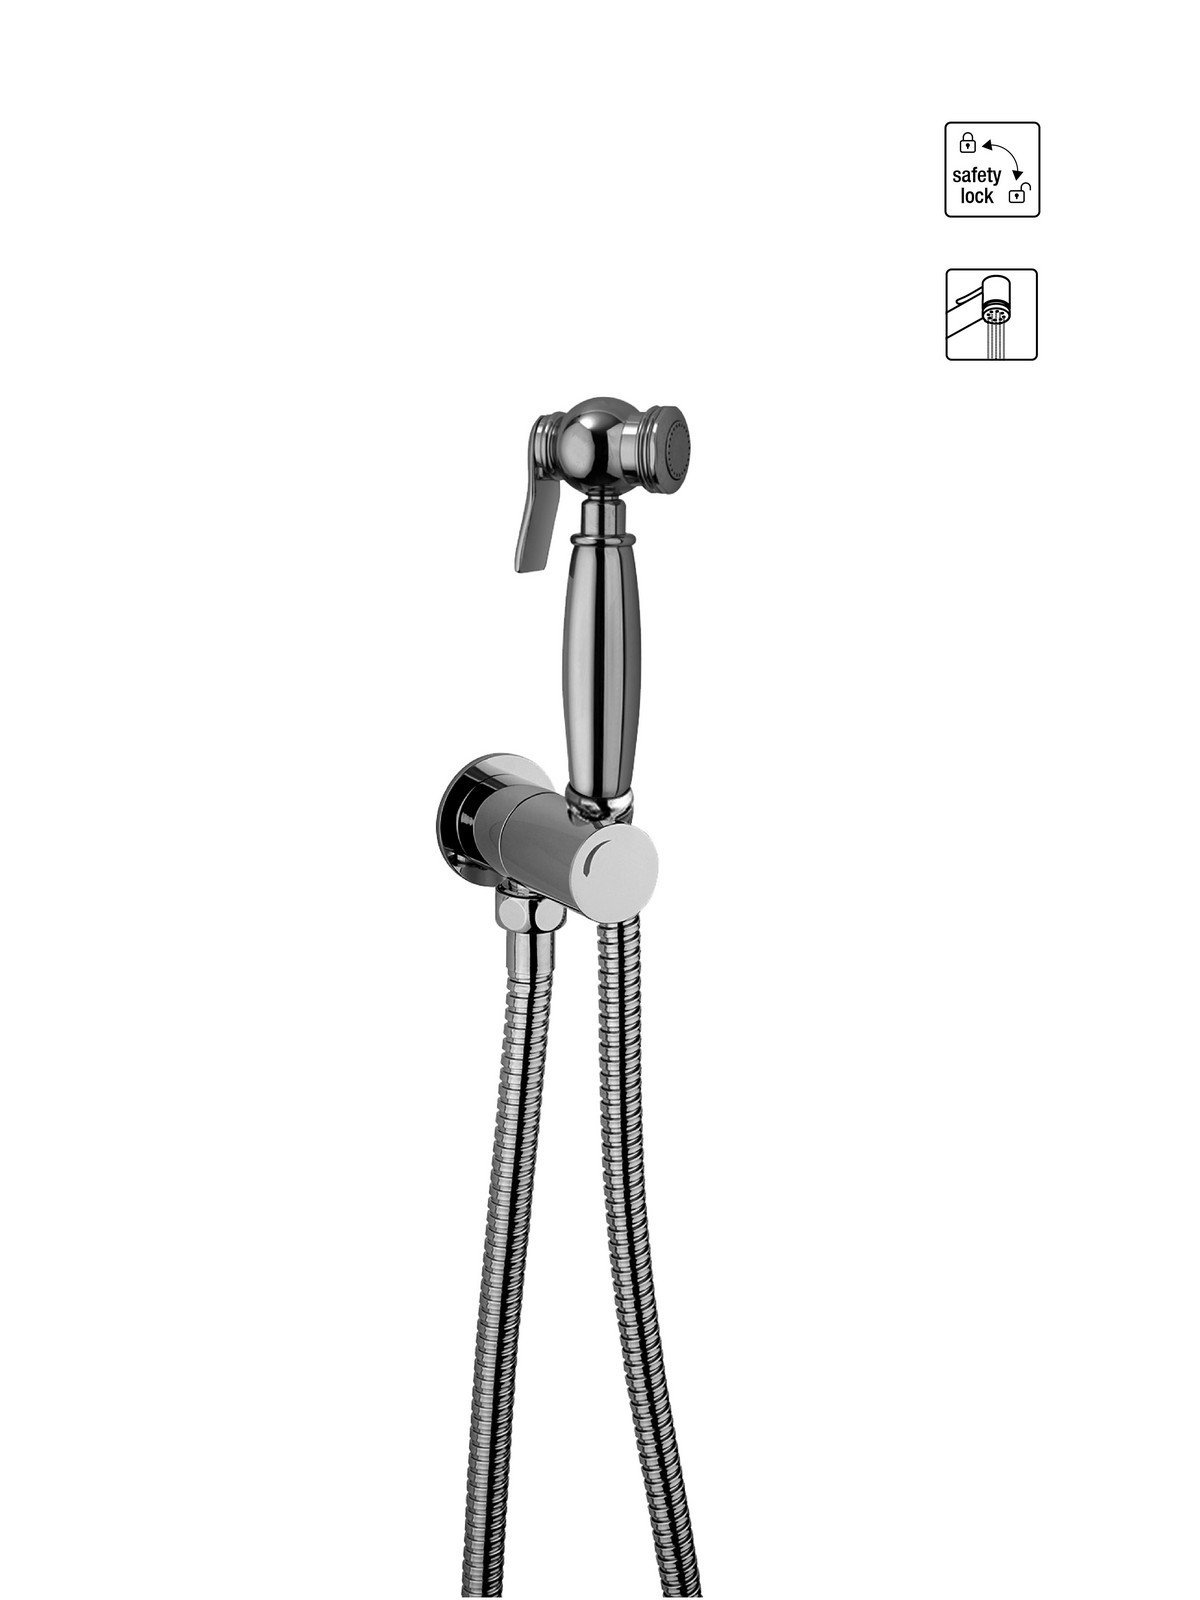 Water spray double click hand shower with double lock cross flex